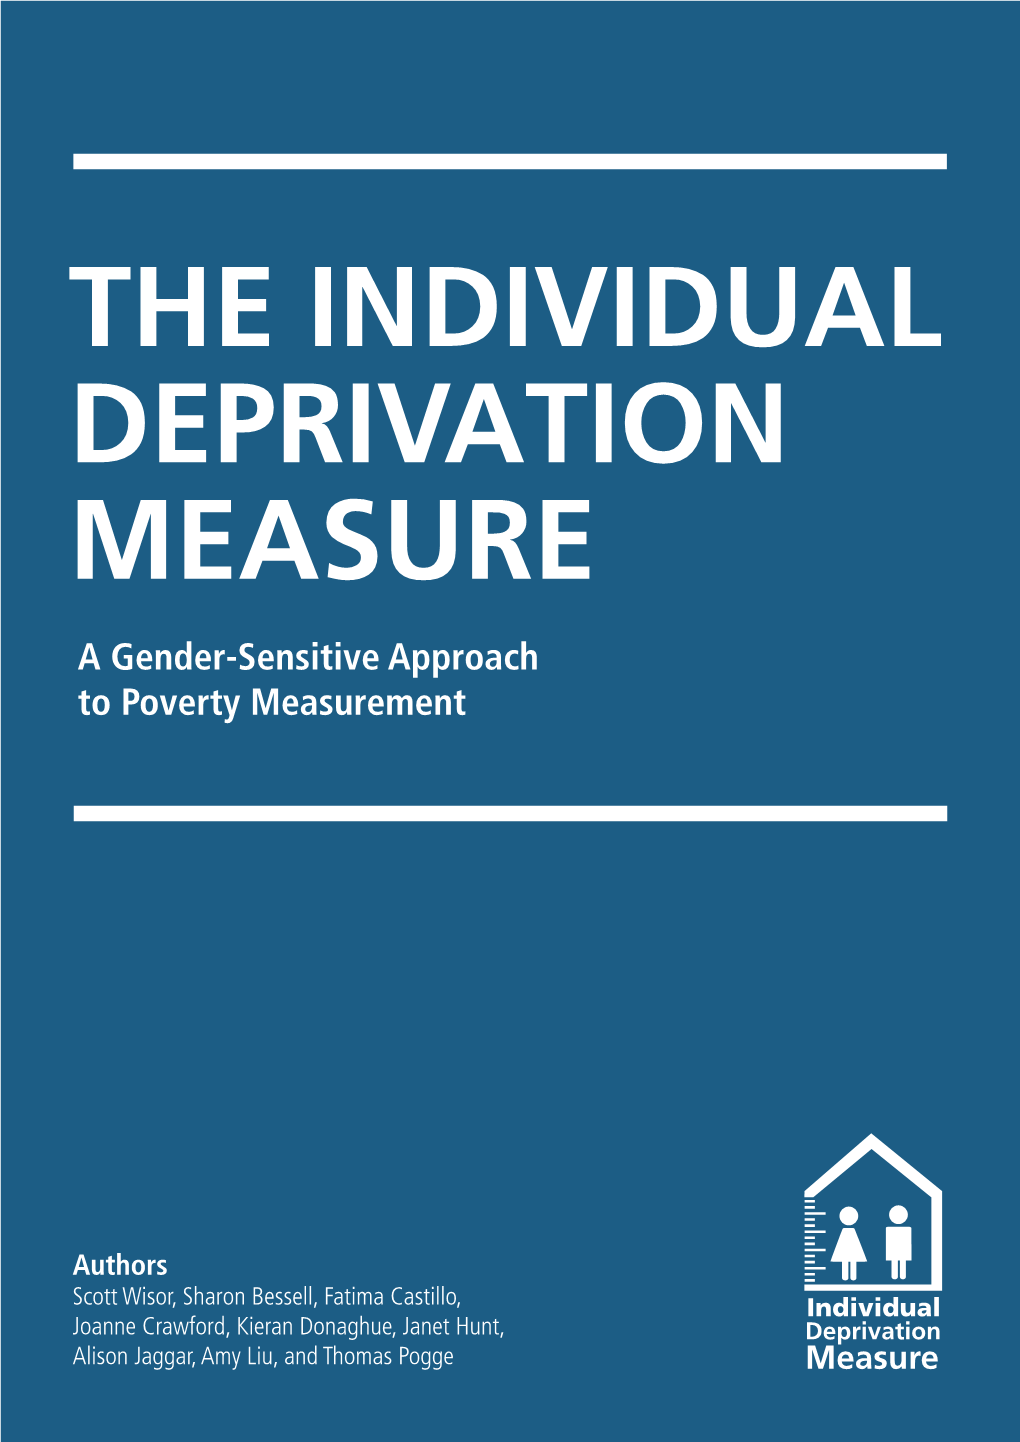 THE INDIVIDUAL DEPRIVATION MEASURE a Gender-Sensitive Approach to Poverty Measurement